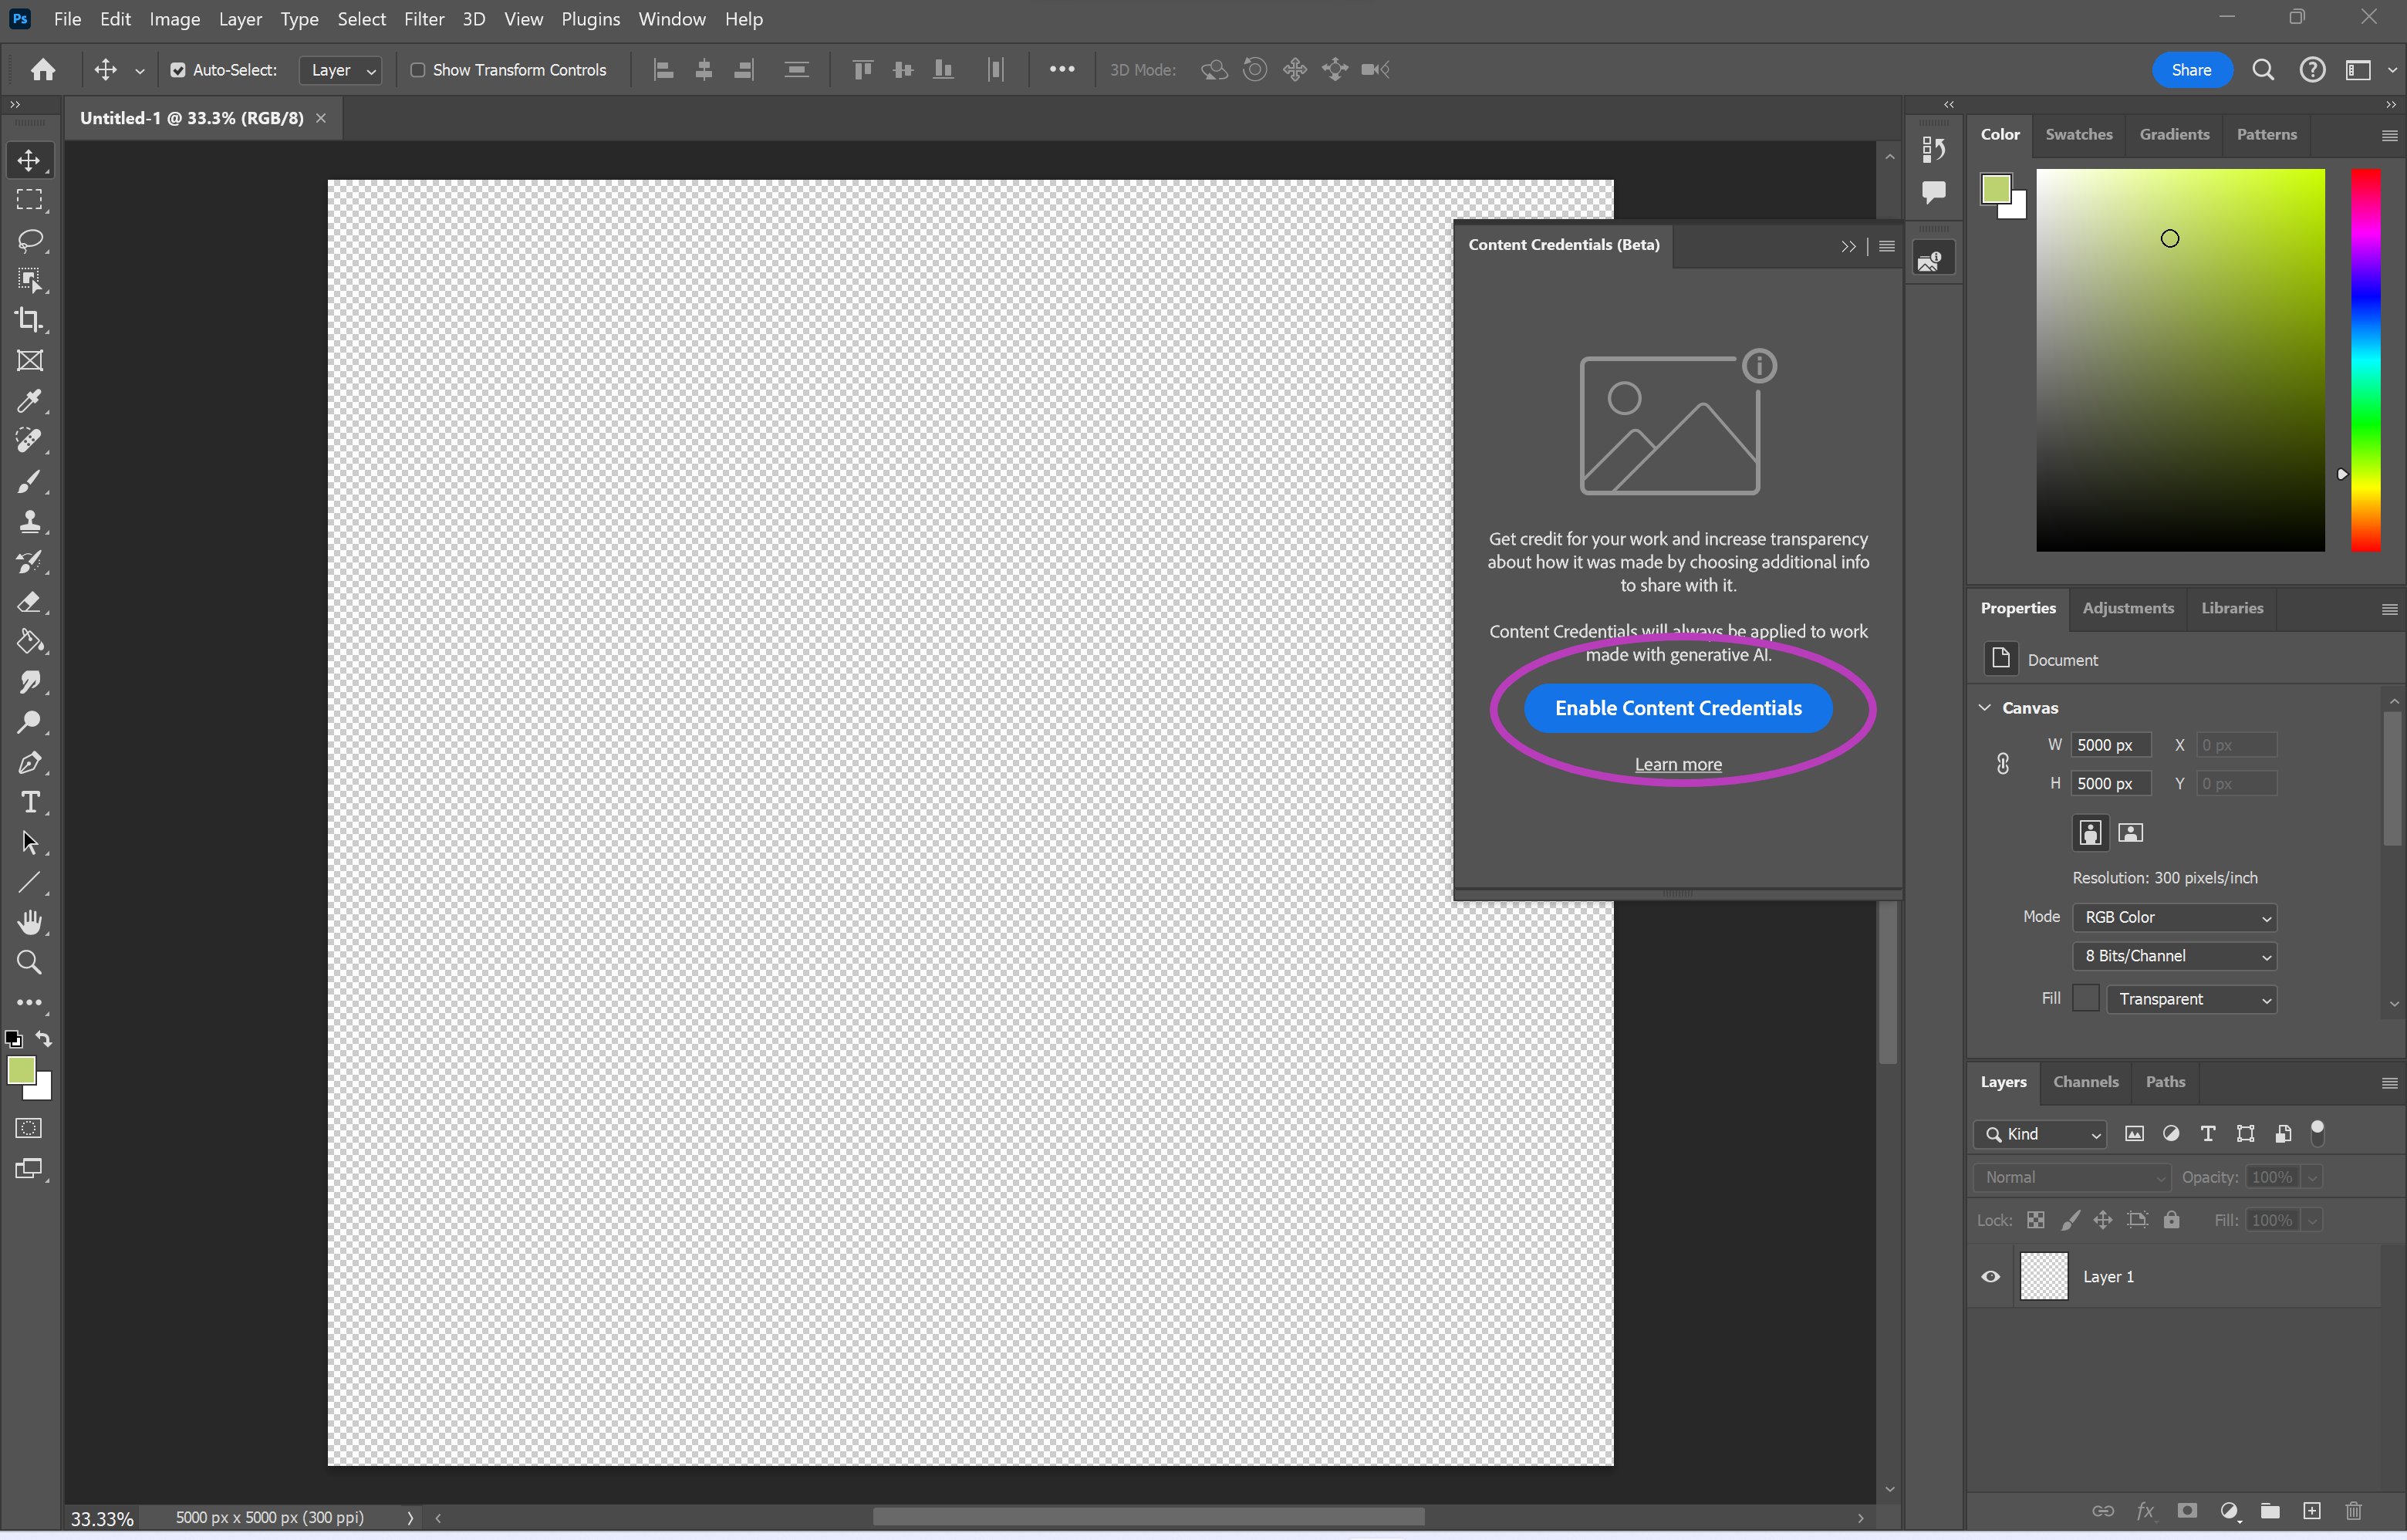 How to add Content Credentials to an image in Photoshop